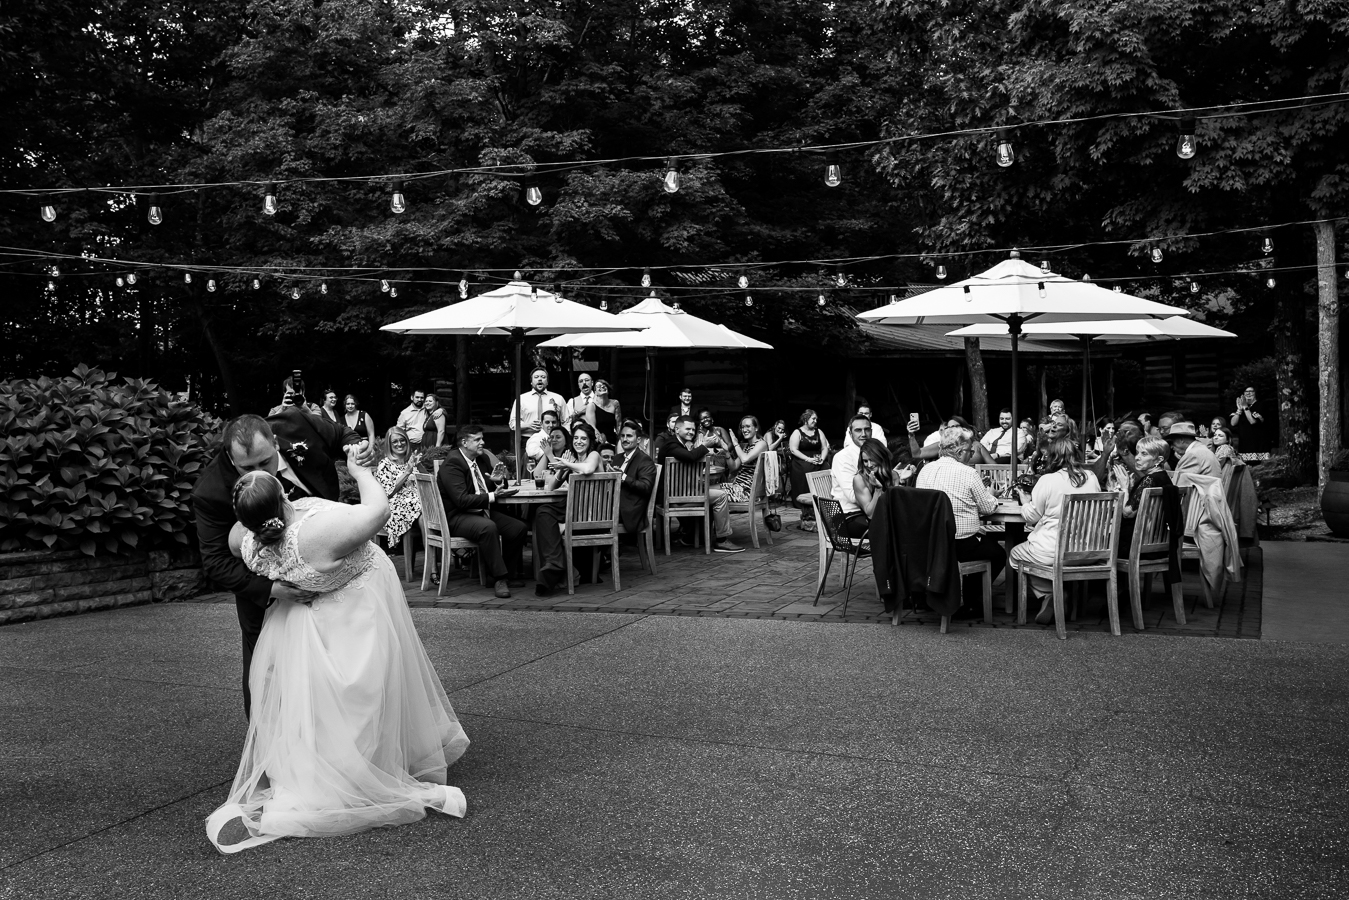 Oak Lodge Wedding Photographer, rhinehart photography, captures this photojournalistic moment of the bride and groom dancing together while their guests sit at the outdoor tables watching them dance while clapping and smiling during this outdoor wedding reception in stahsltown, pa 